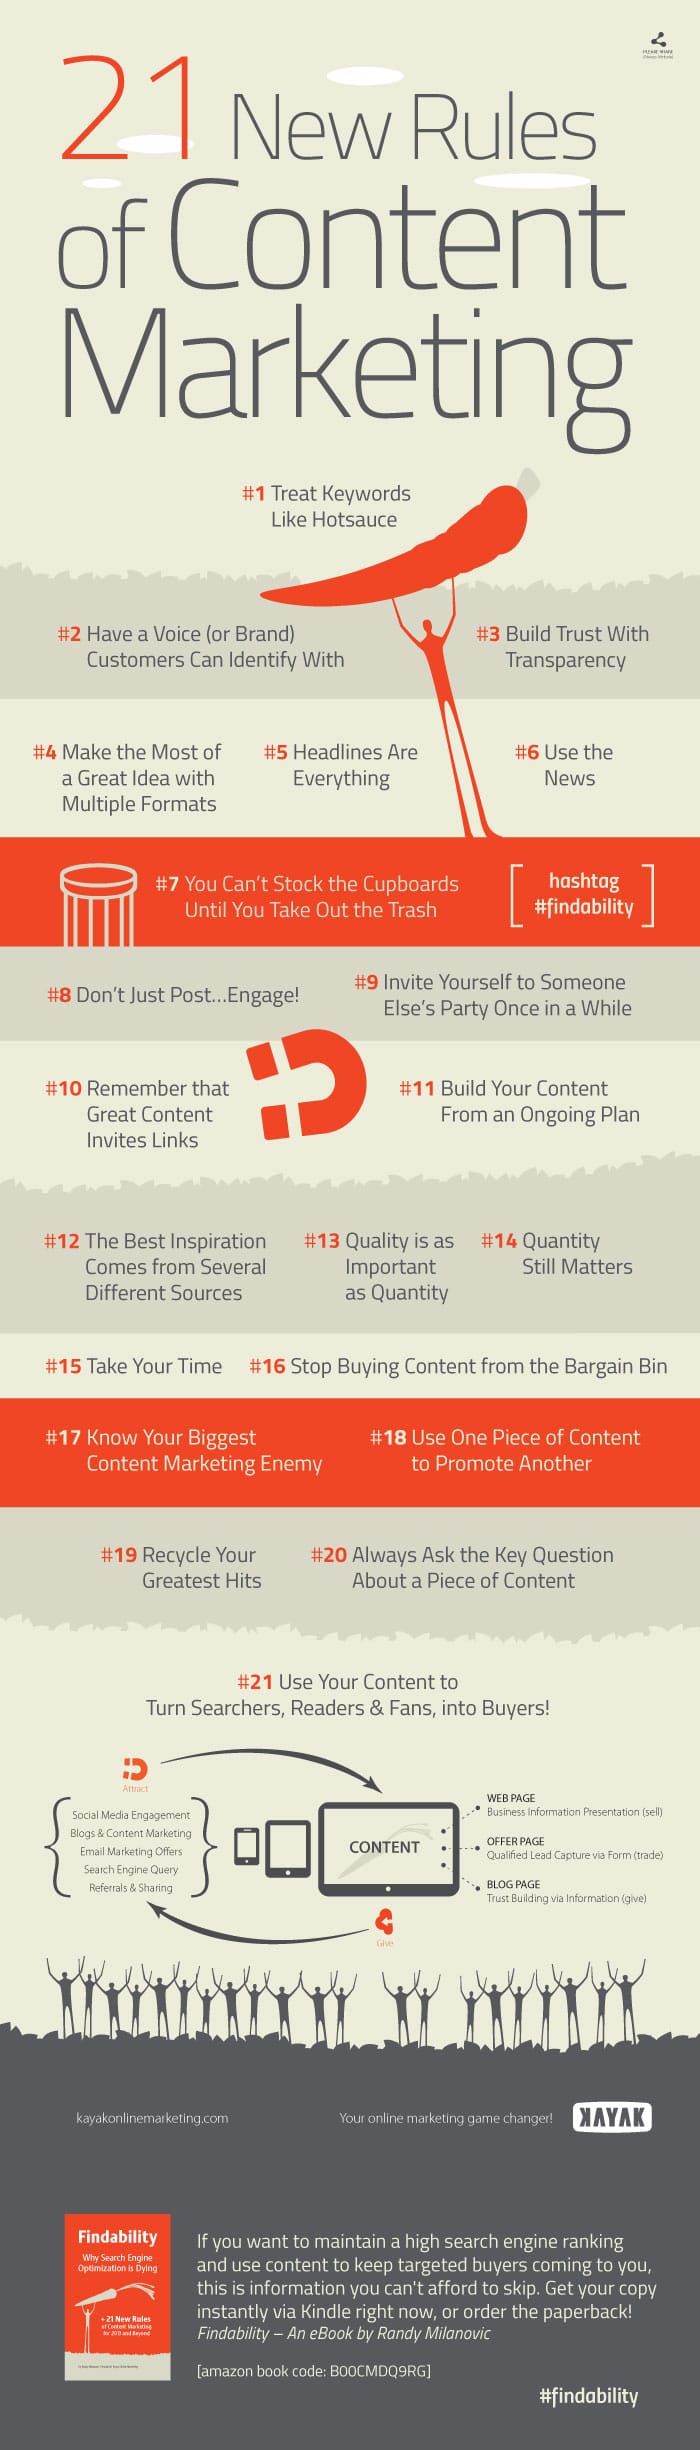 21 New Content Marketing Rules [Infographic]